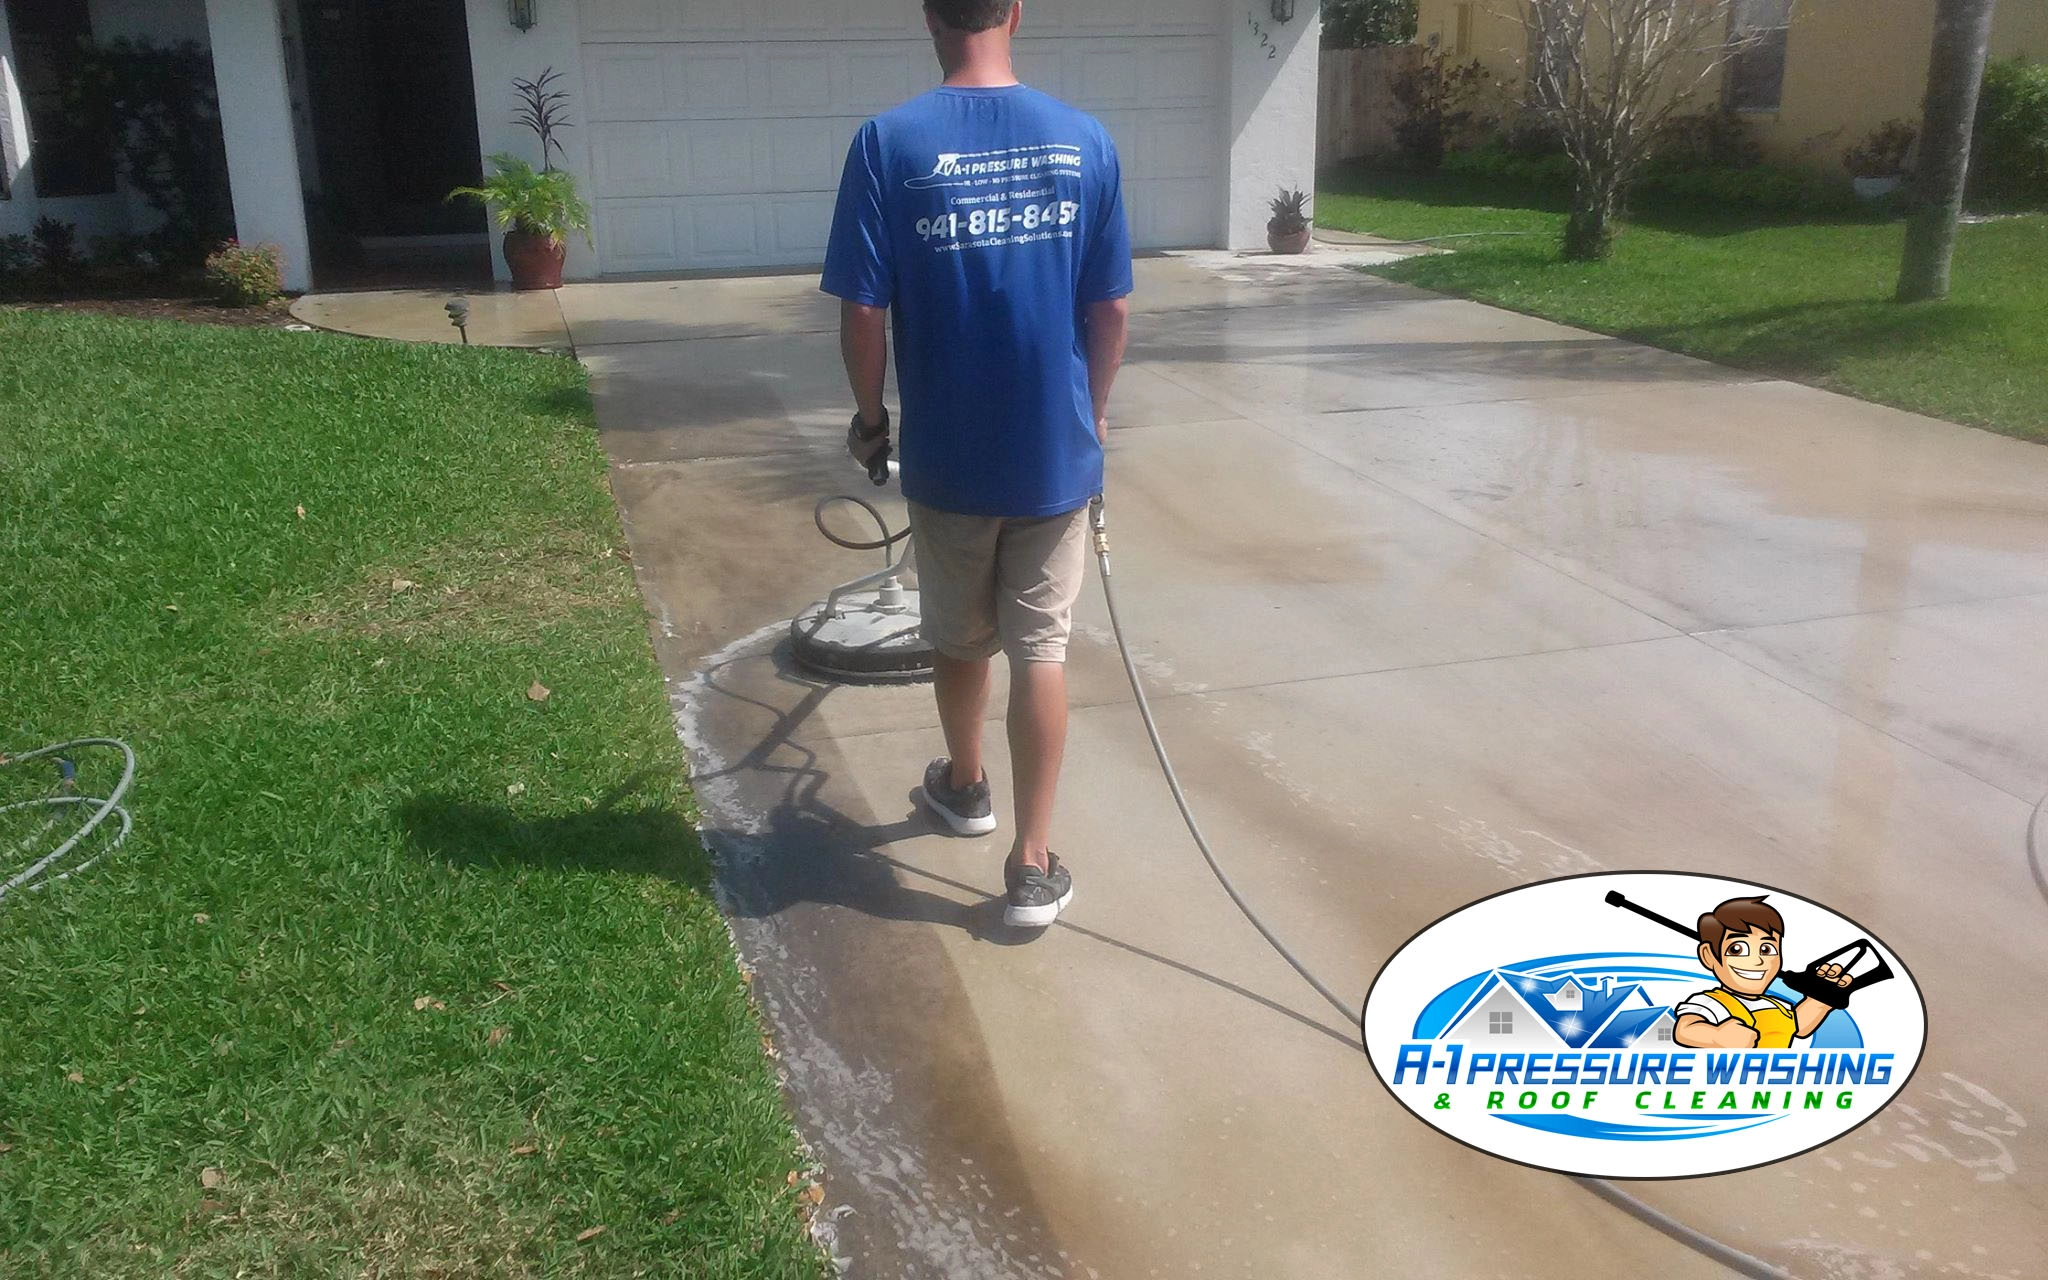 Driveway Cleaning | A-1 Pressure Washing & Roof Cleaning | 941-815-8454 